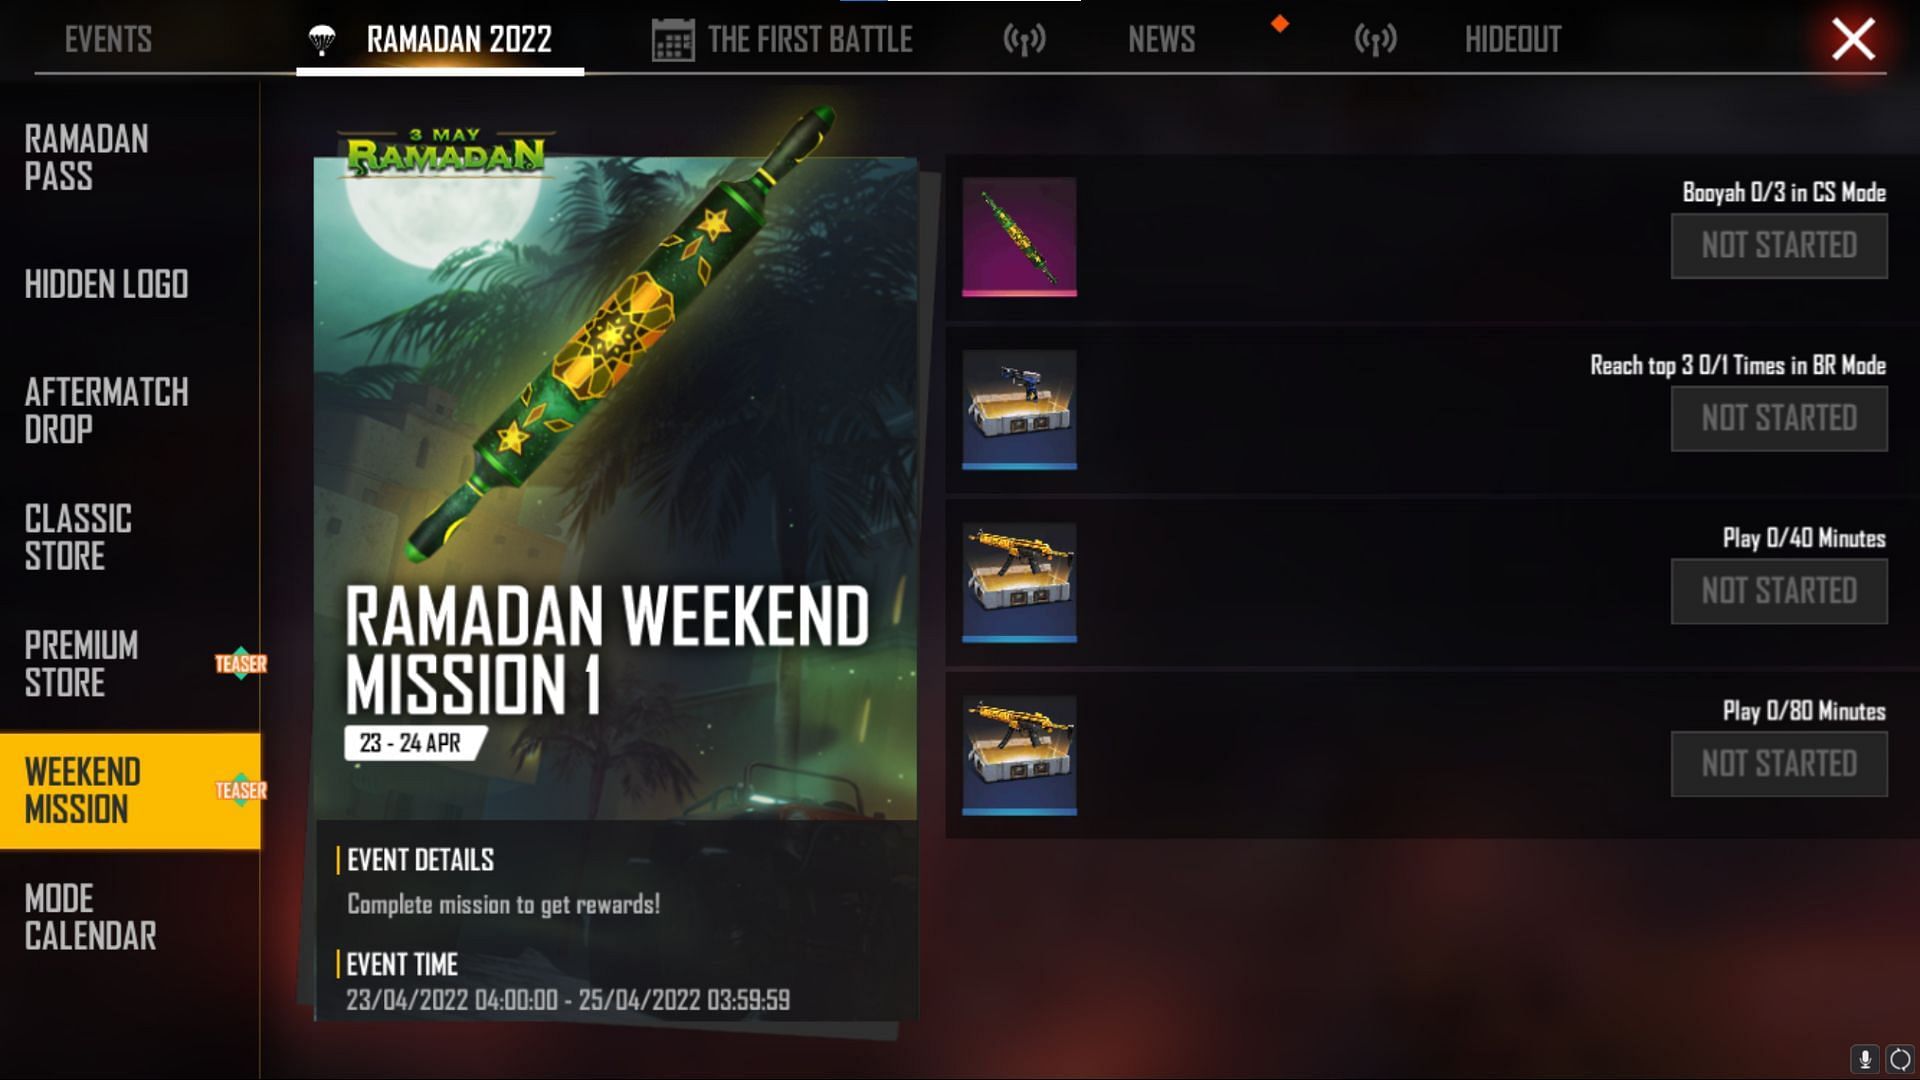 Weekend Mission event will be available only on the two particular days (Image via Garena)